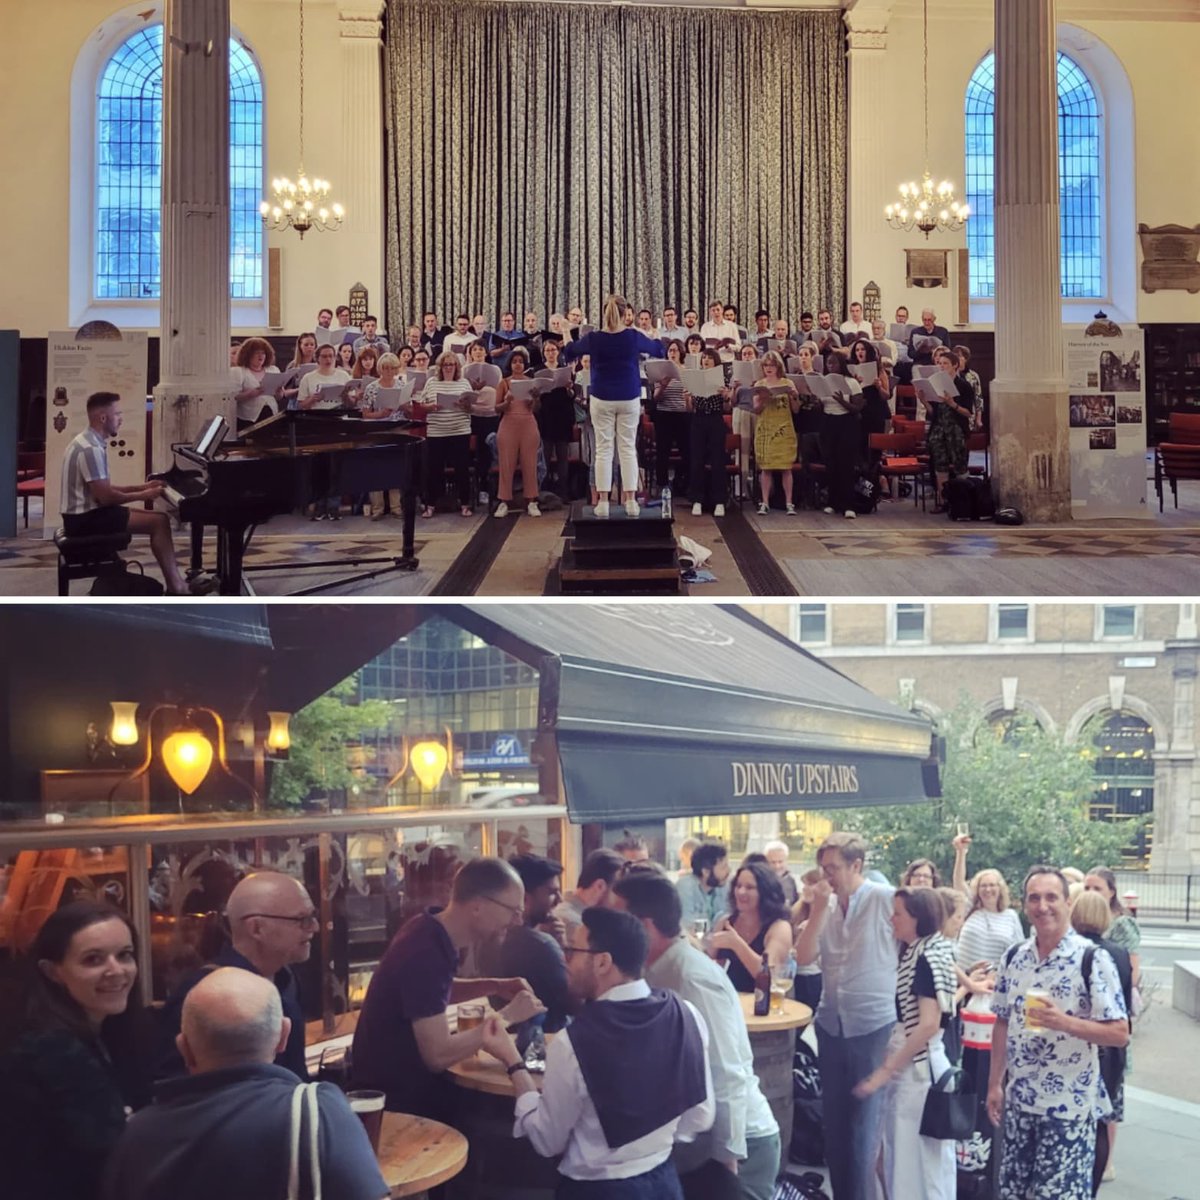 And that's a wrap for another fabulous term of singing!

Last night we had an awesome last rehearsal before our summer break & it was great to see so many members at the pub afterwards 🍻 🍷🧃

#Choir #ChoralSinging #Singing #MakingMusic #Music #JoinAChoir #Musicians